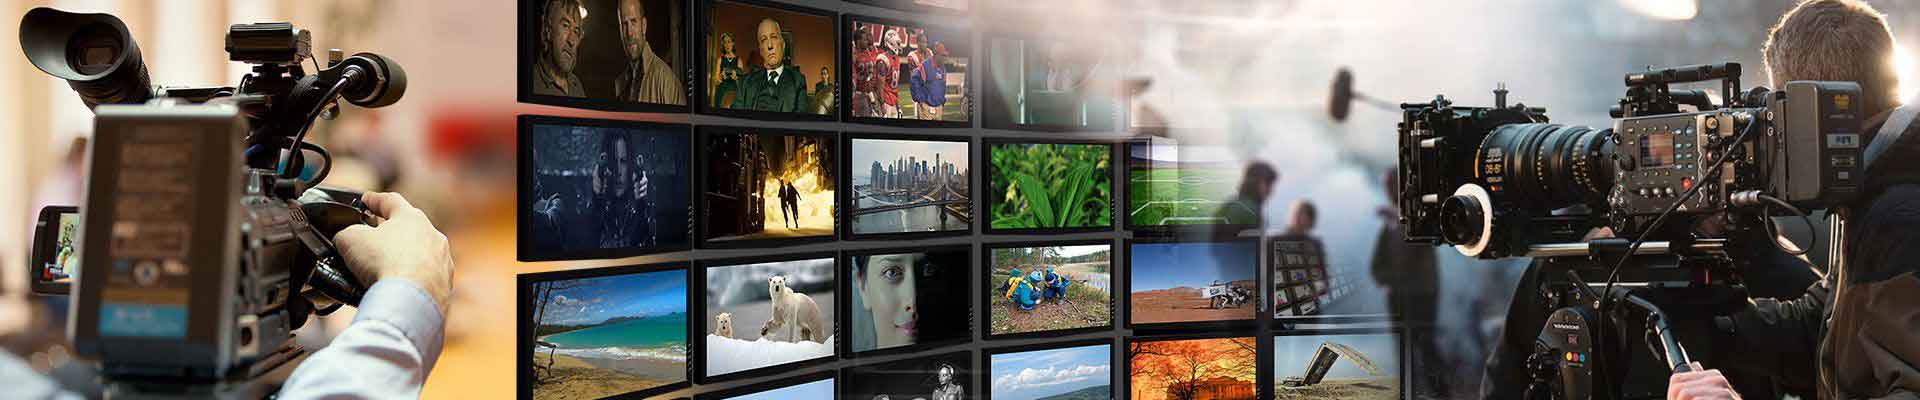 Film, Television, and Advertising Industry